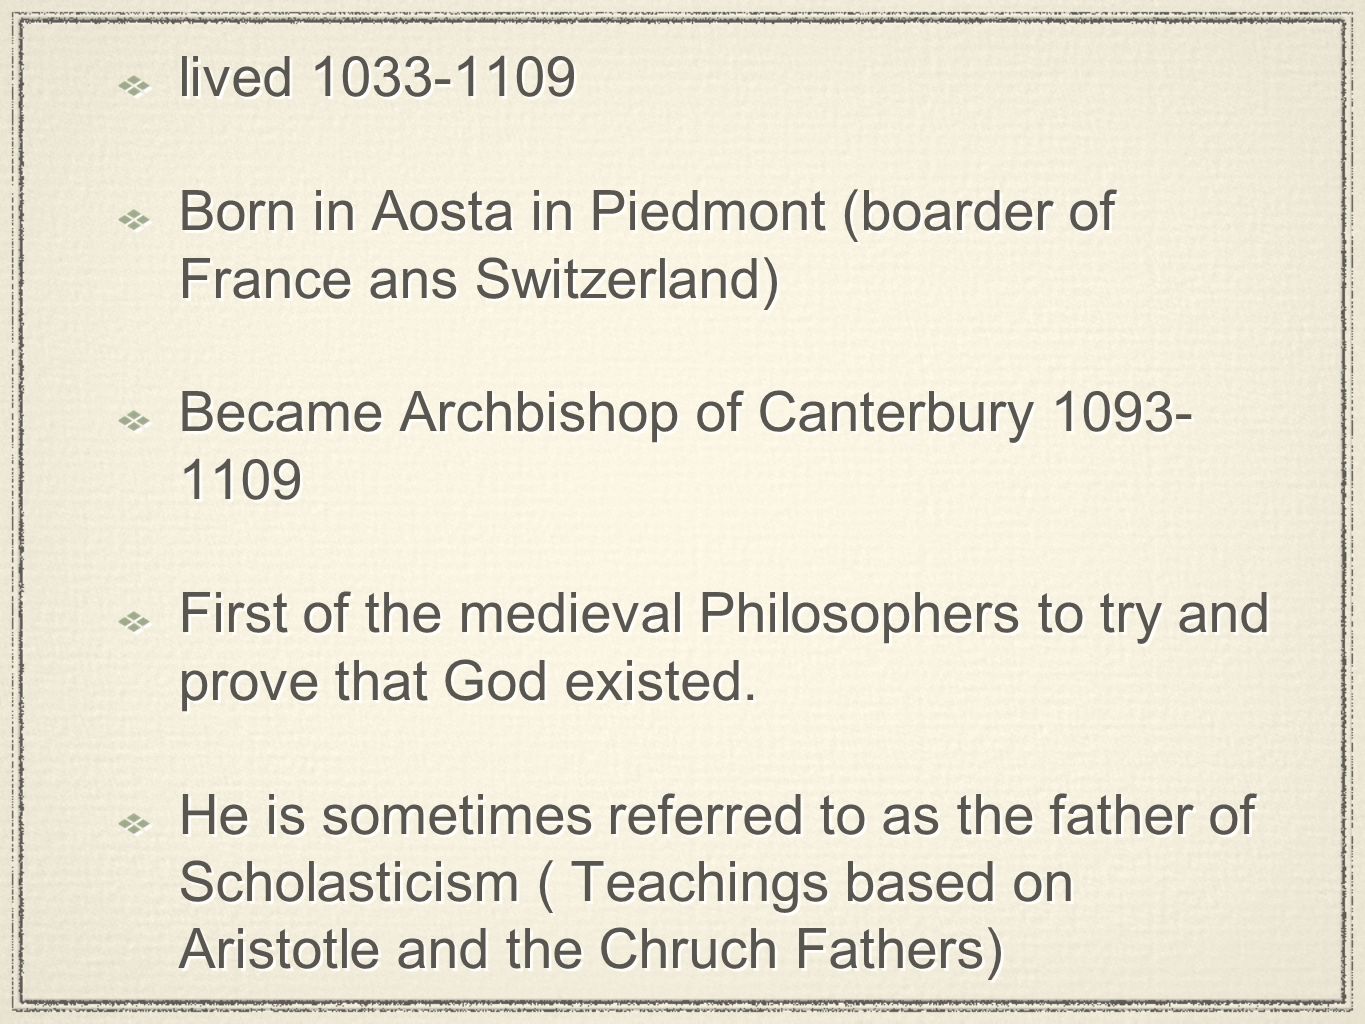 lived Born in Aosta in Piedmont (boarder of France ans Switzerland) Became Archbishop of Canterbury First of the medieval Philosophers to try and prove that God existed.